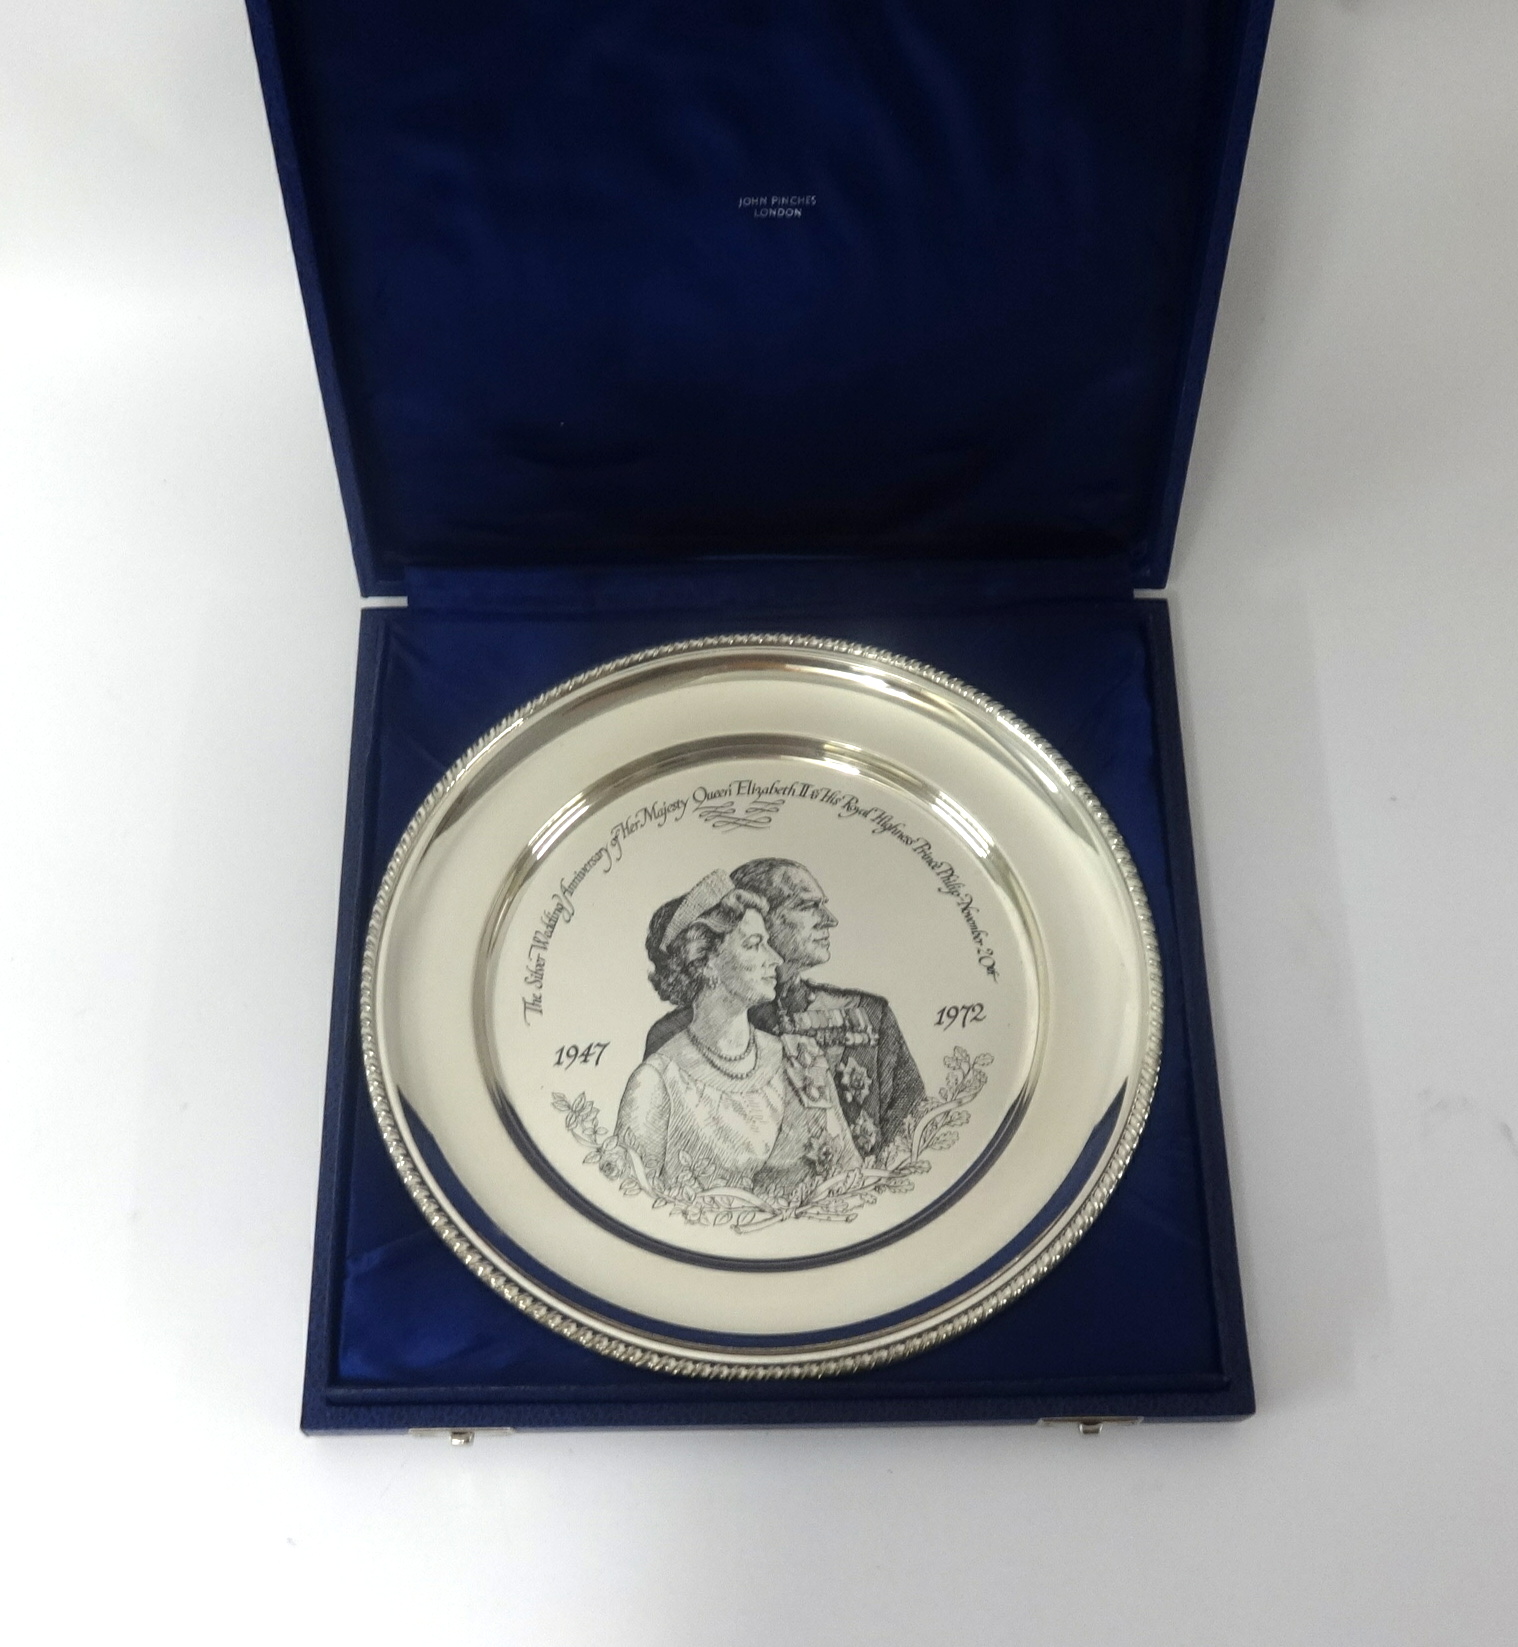 John Pinches, The Royal Anniversary plate 1947-1972, 25cm diameter, cast in sterling silver from a